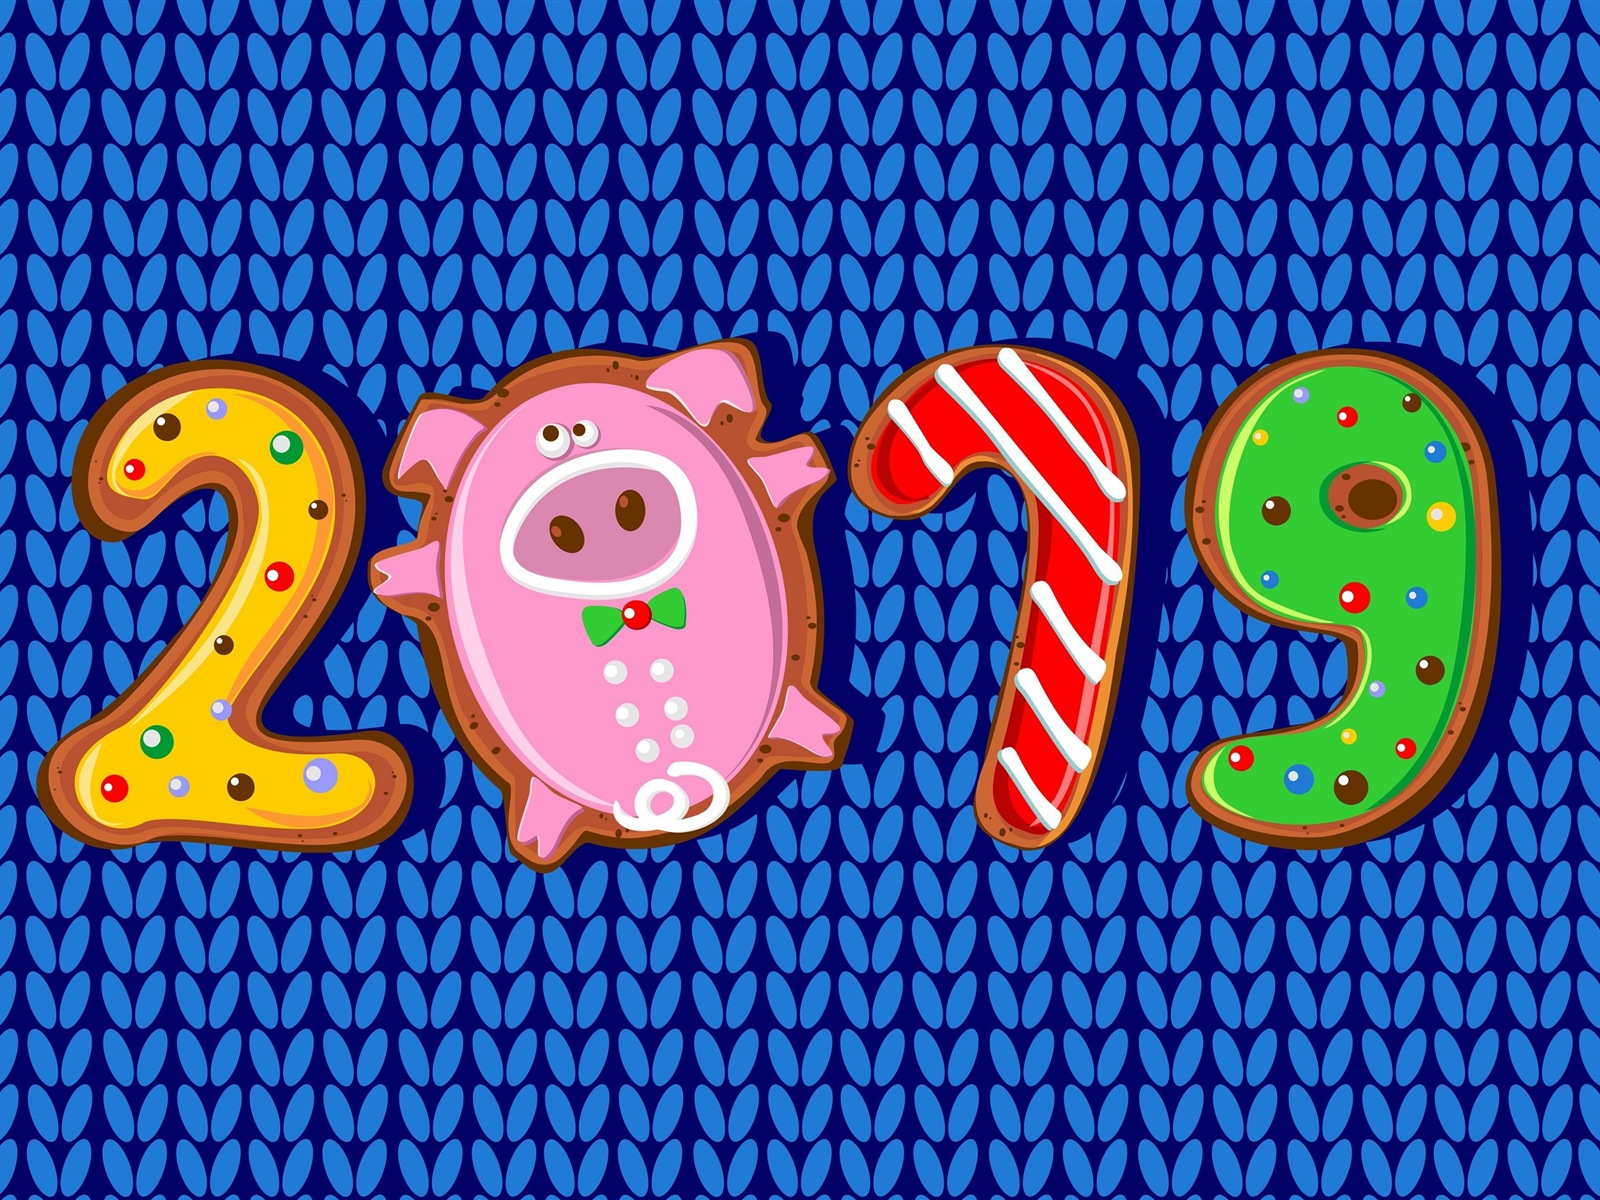 Happy New Year 2019 HD wallpapers #15 - 1600x1200